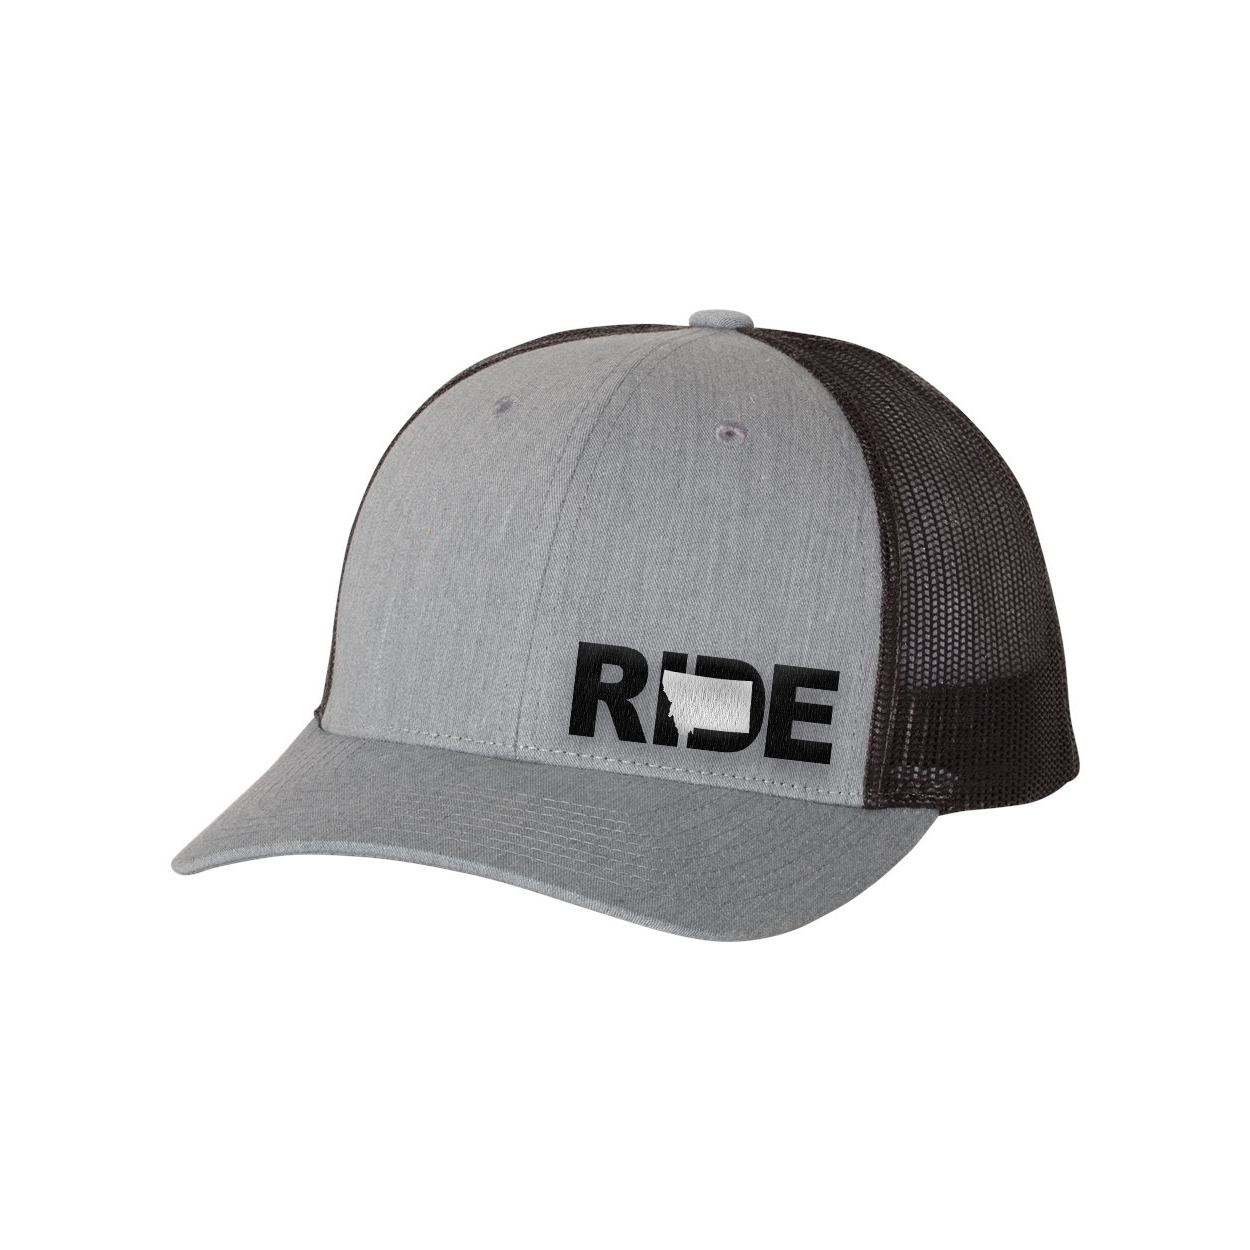 Ride Montana Night Out Embroidered Snapback Trucker Hat Heather Gray/Black